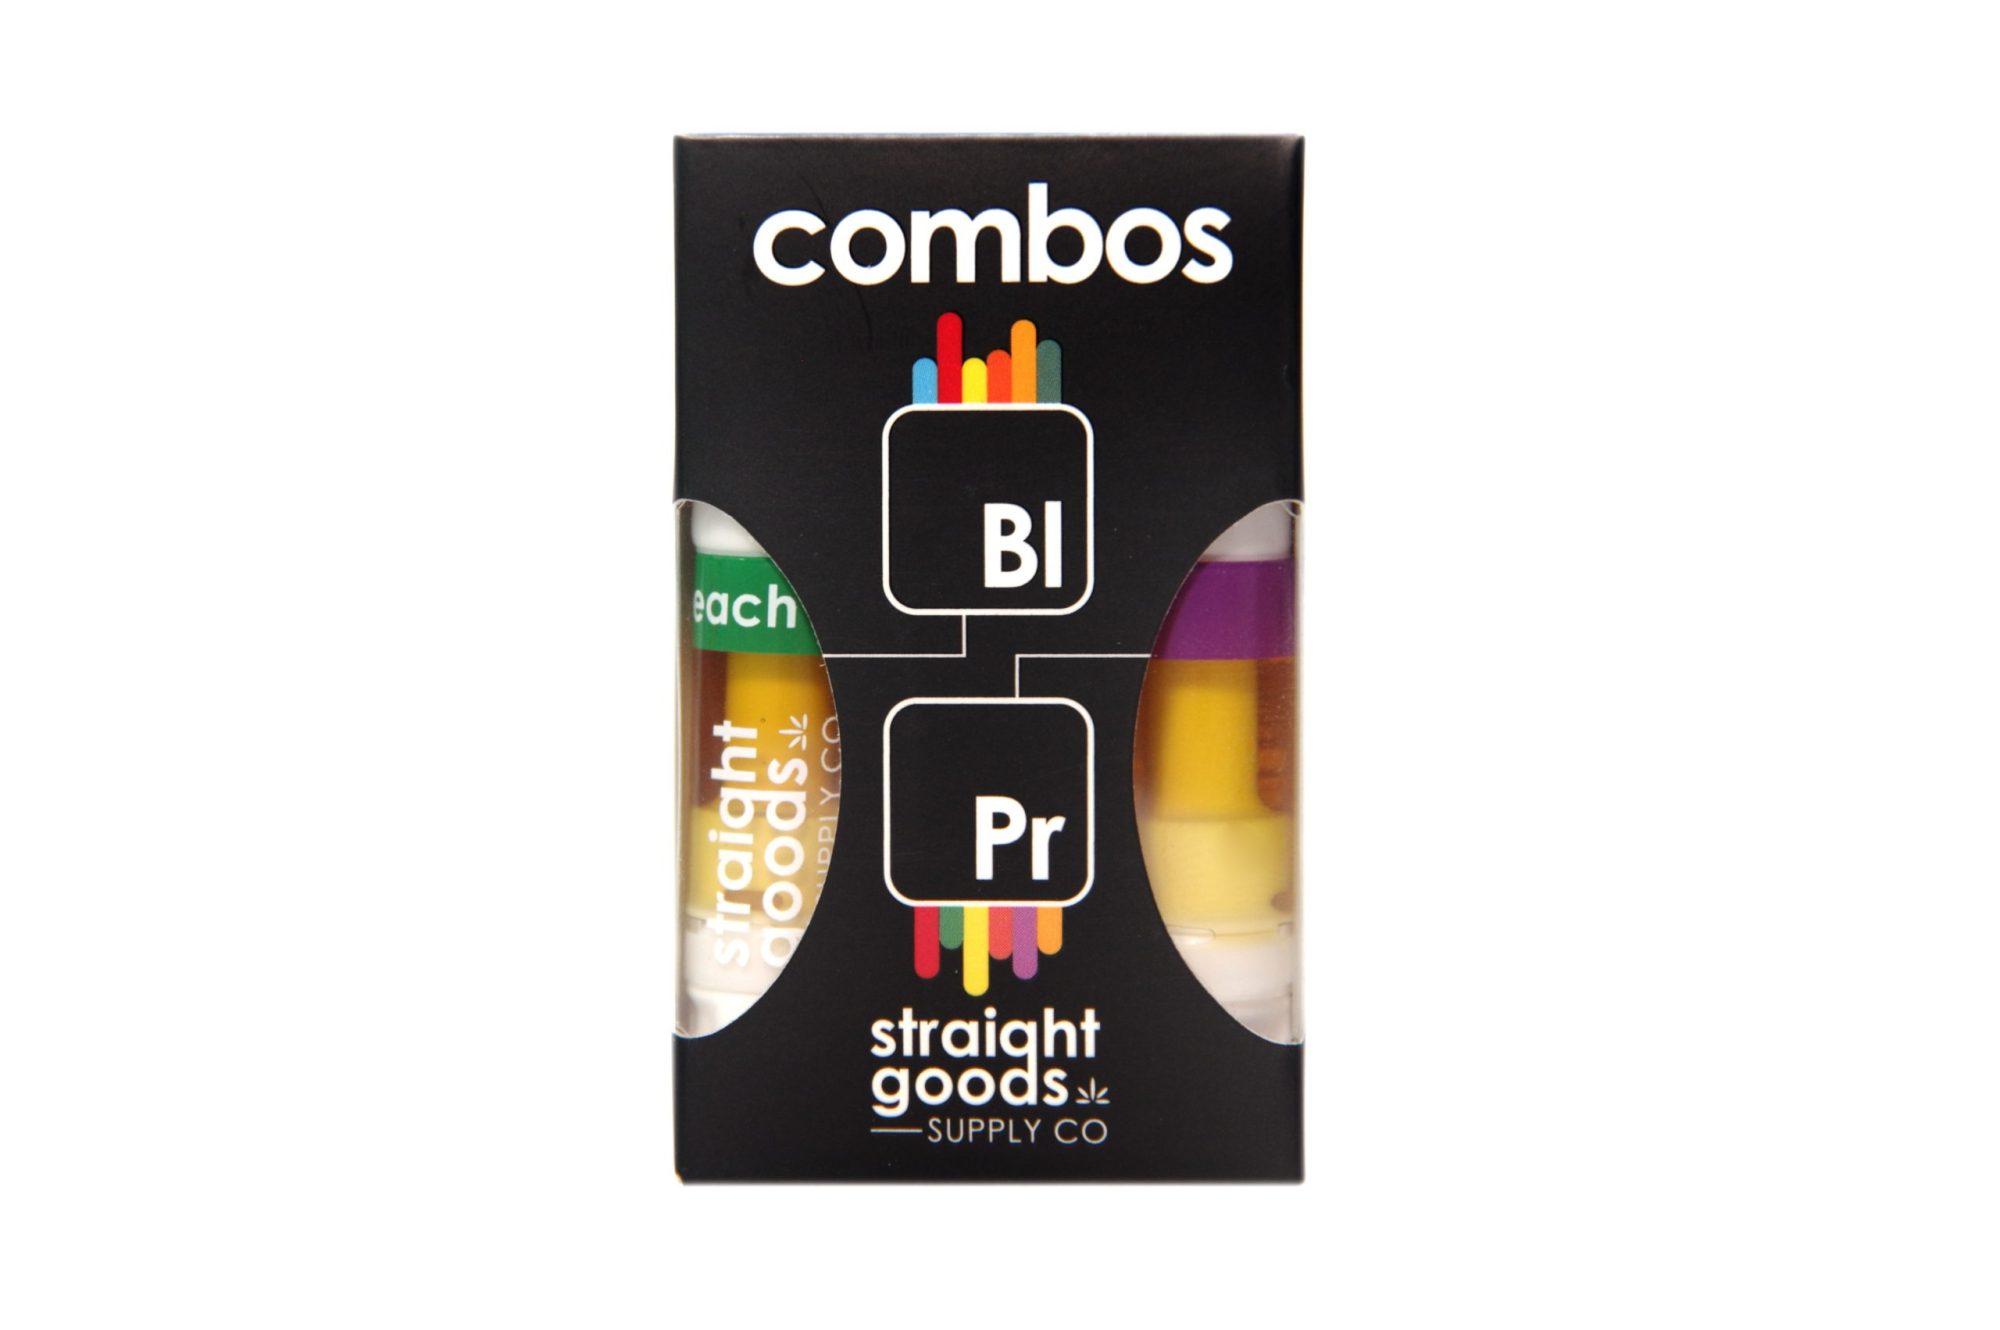 Buy Straight Goods - 2 In 1 Combos - Blue Lavender x Peach Ringz (2 x 1 Gram Carts) at Wccannabis Online Shop